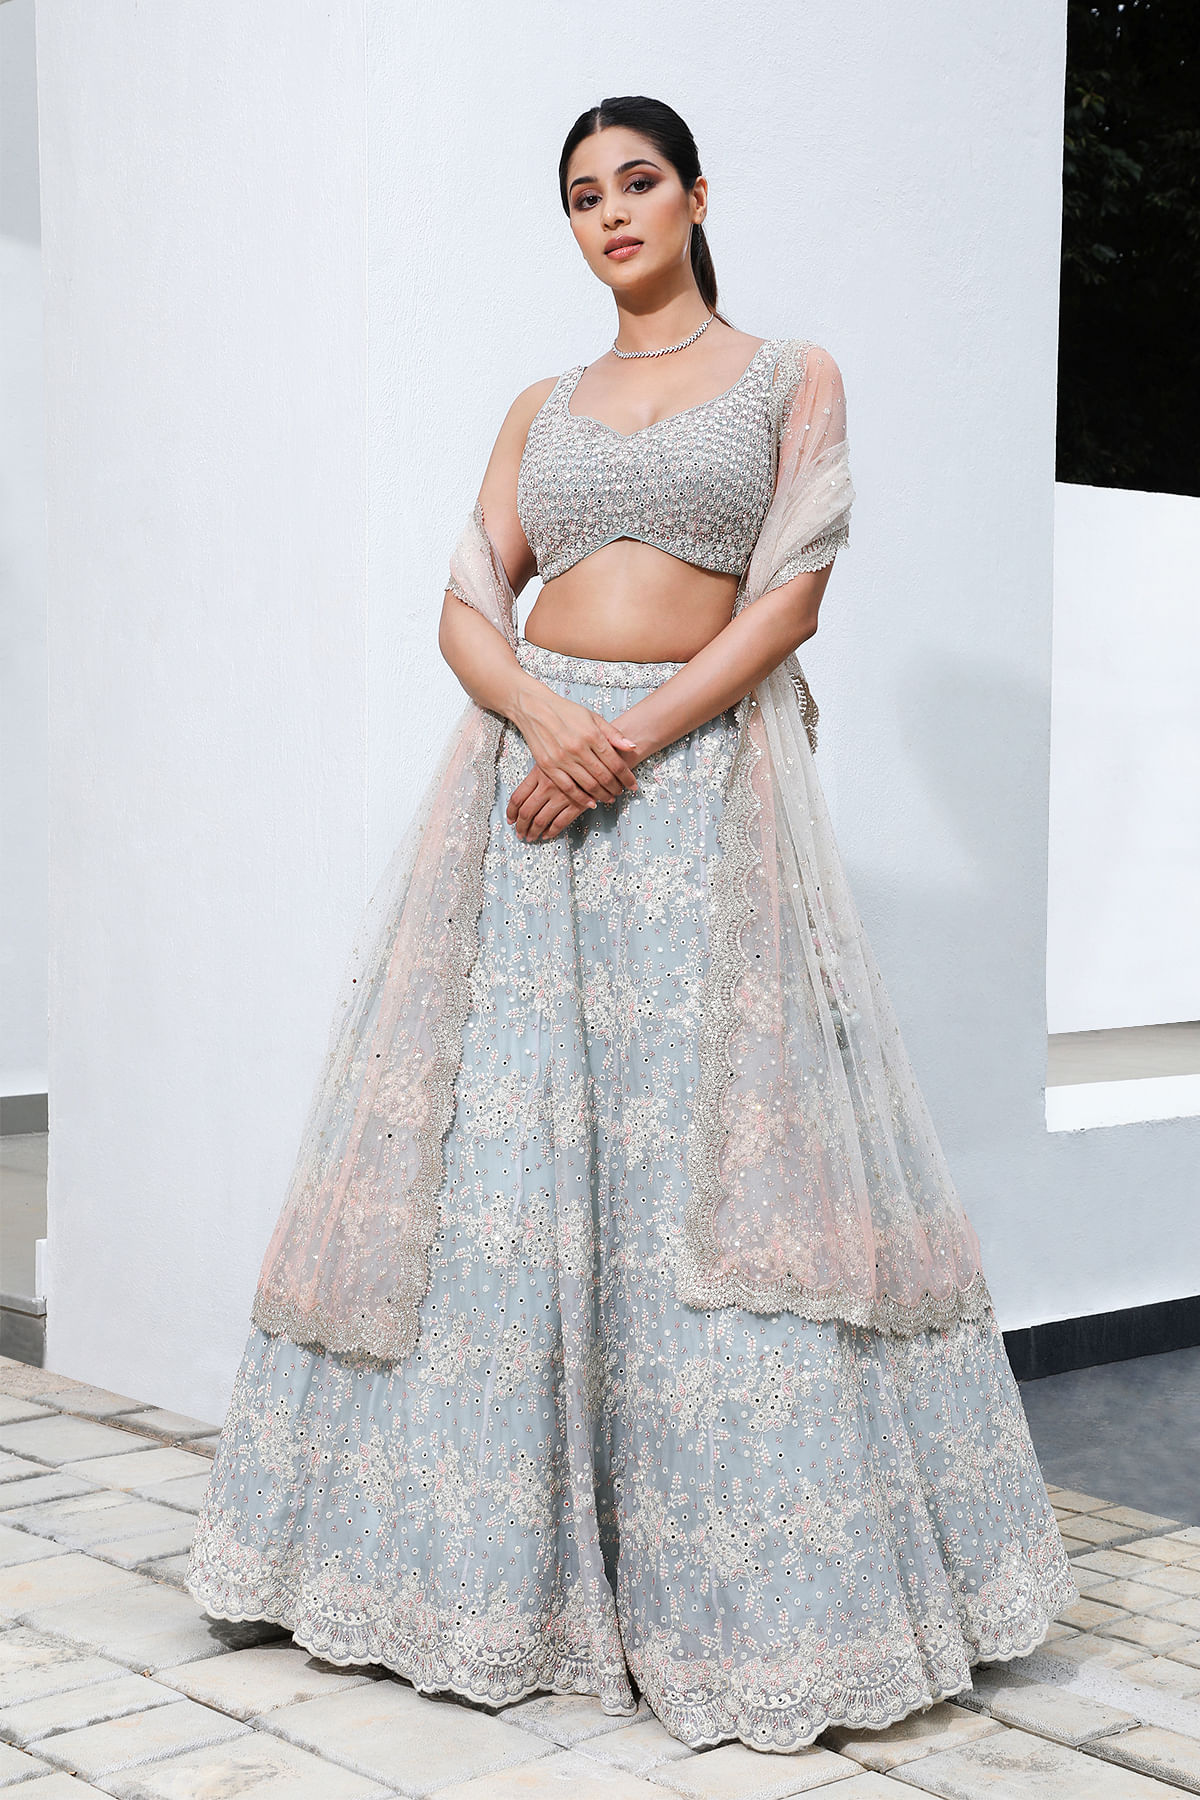 5 Trending Lehengas That Can Make You the Center of Attention This Wedding  Season